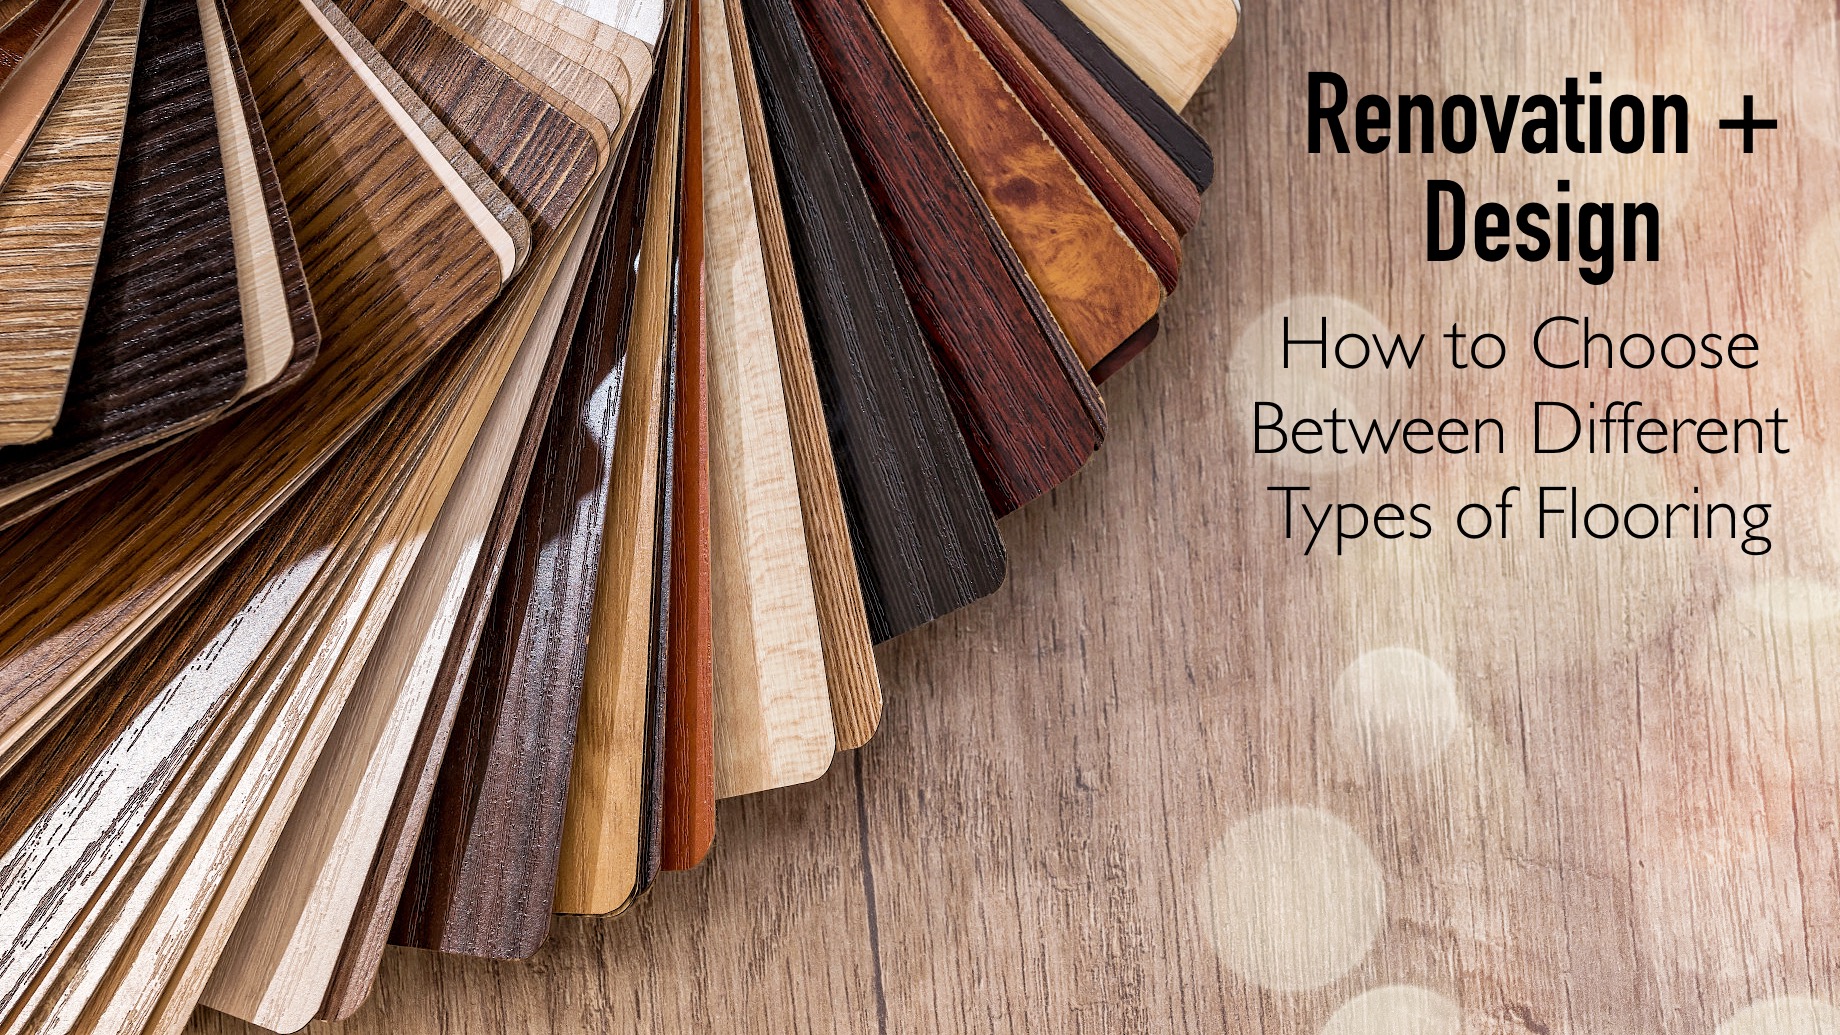 Renovation and Design - How to Choose Between Different Types of Flooring